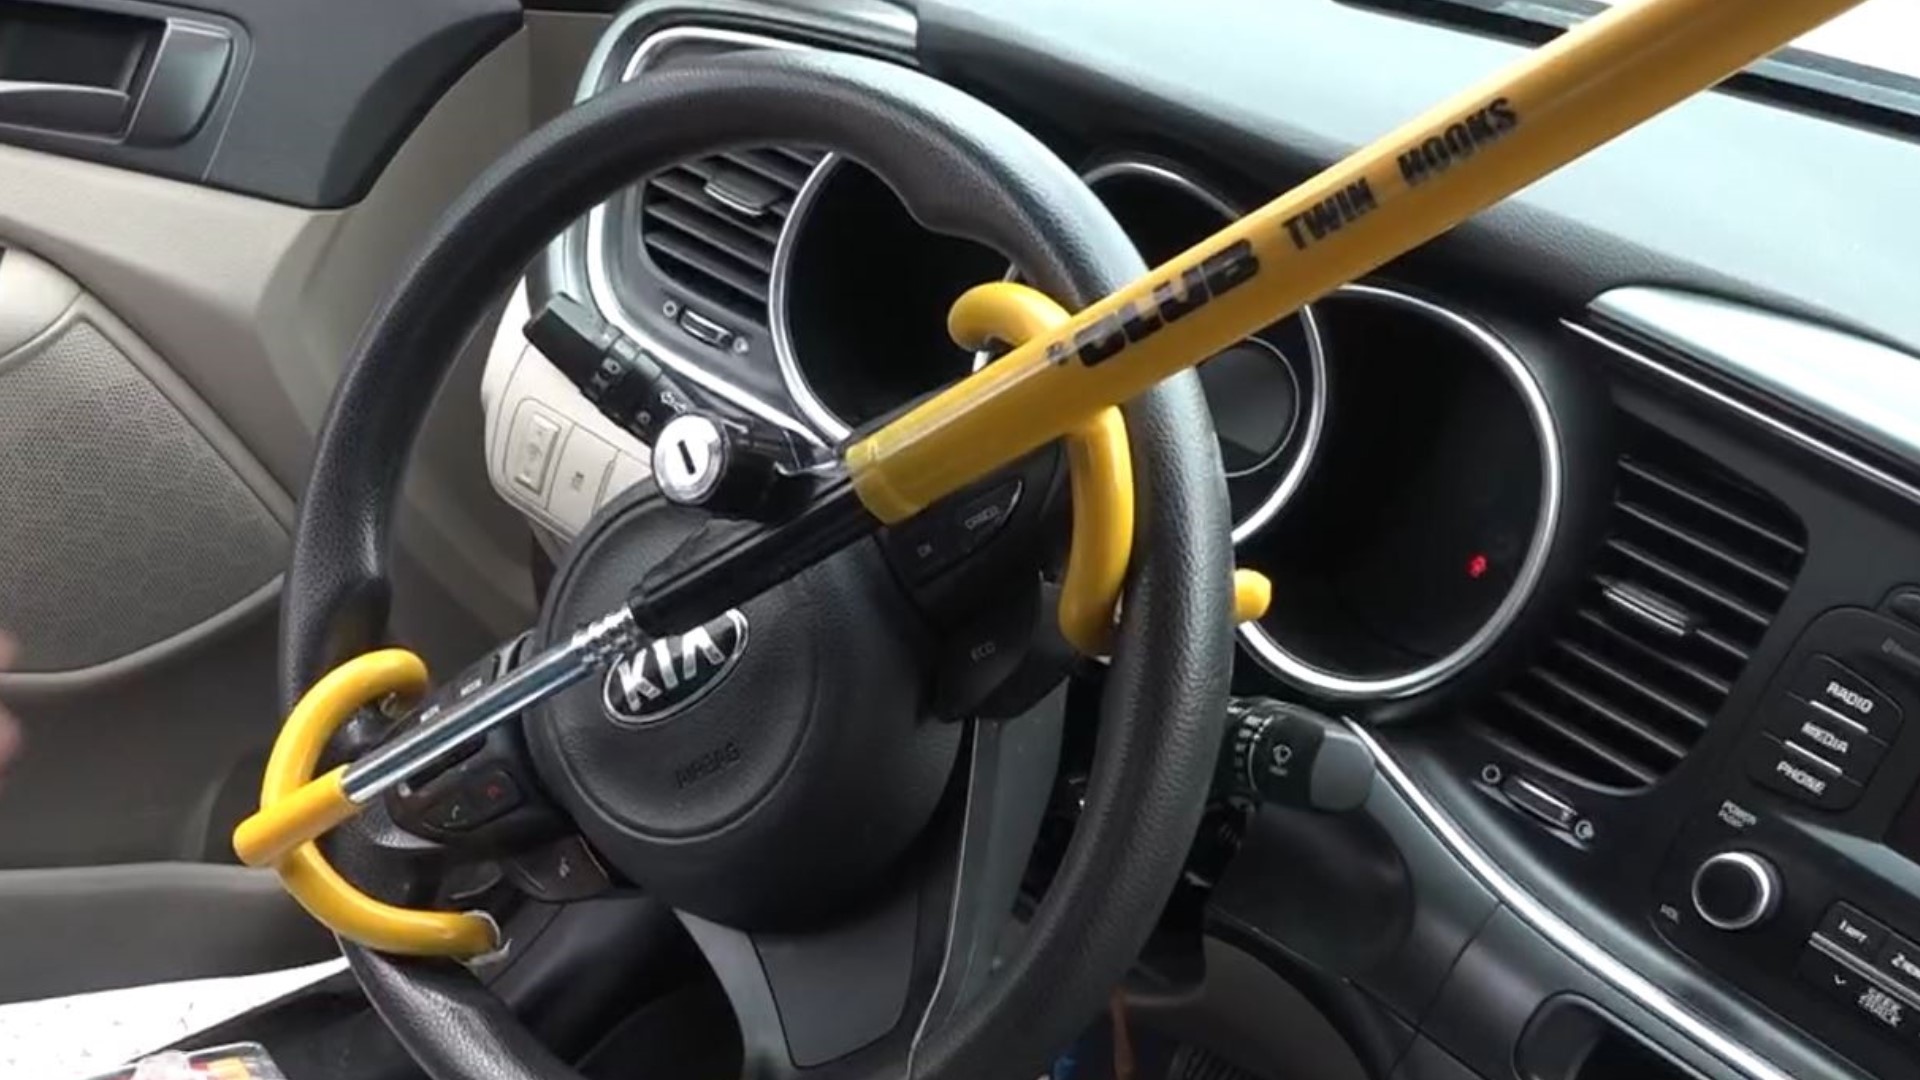 The City of St. Louis is selling steering wheel locks to help protect people from thieves.